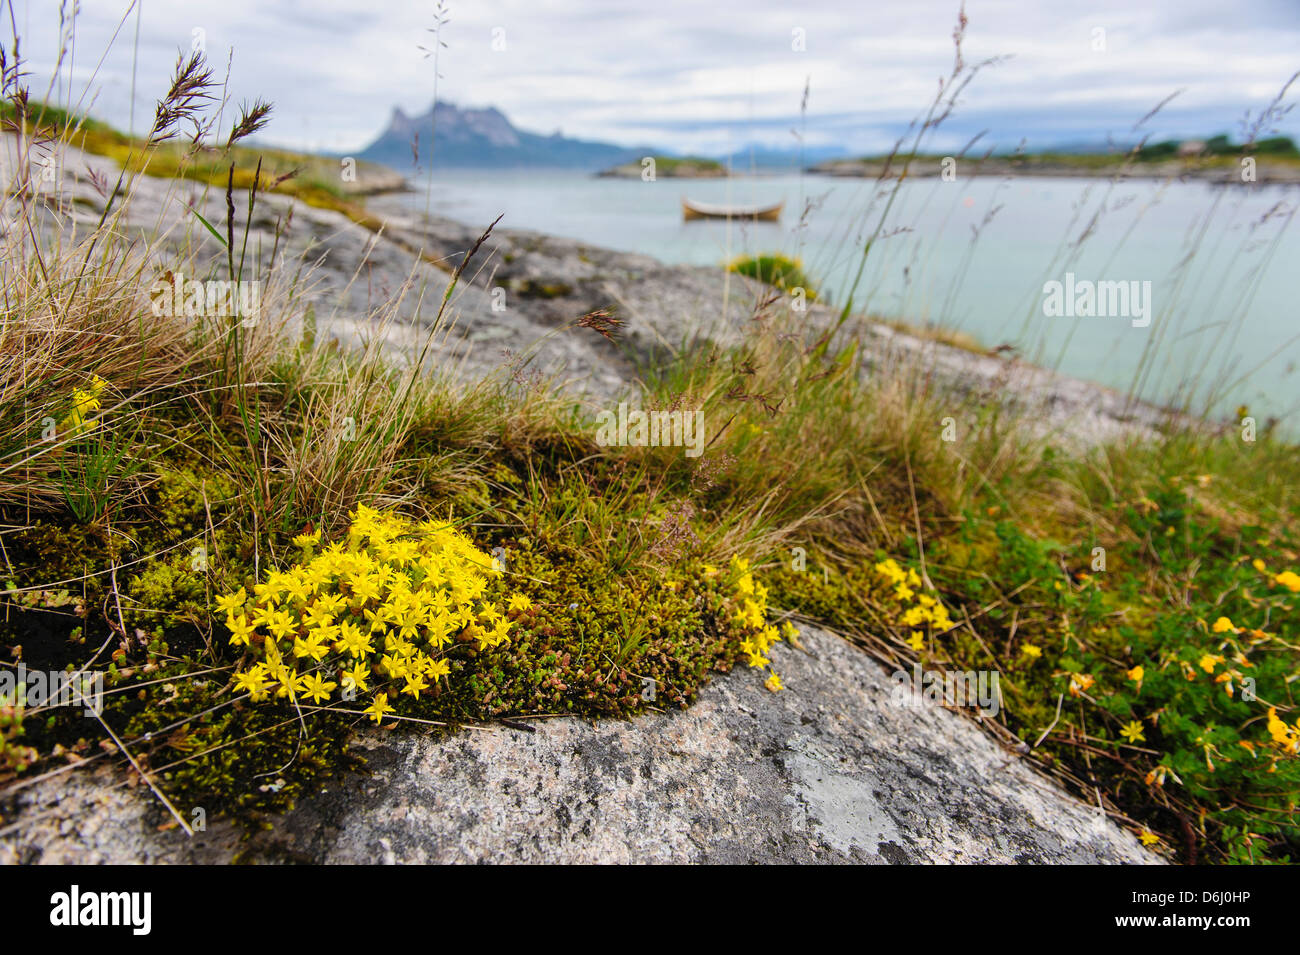 Norway. Rock slab with Sedum sp. and traditional wooden fishing boat anchored in Tranoya. Stock Photo